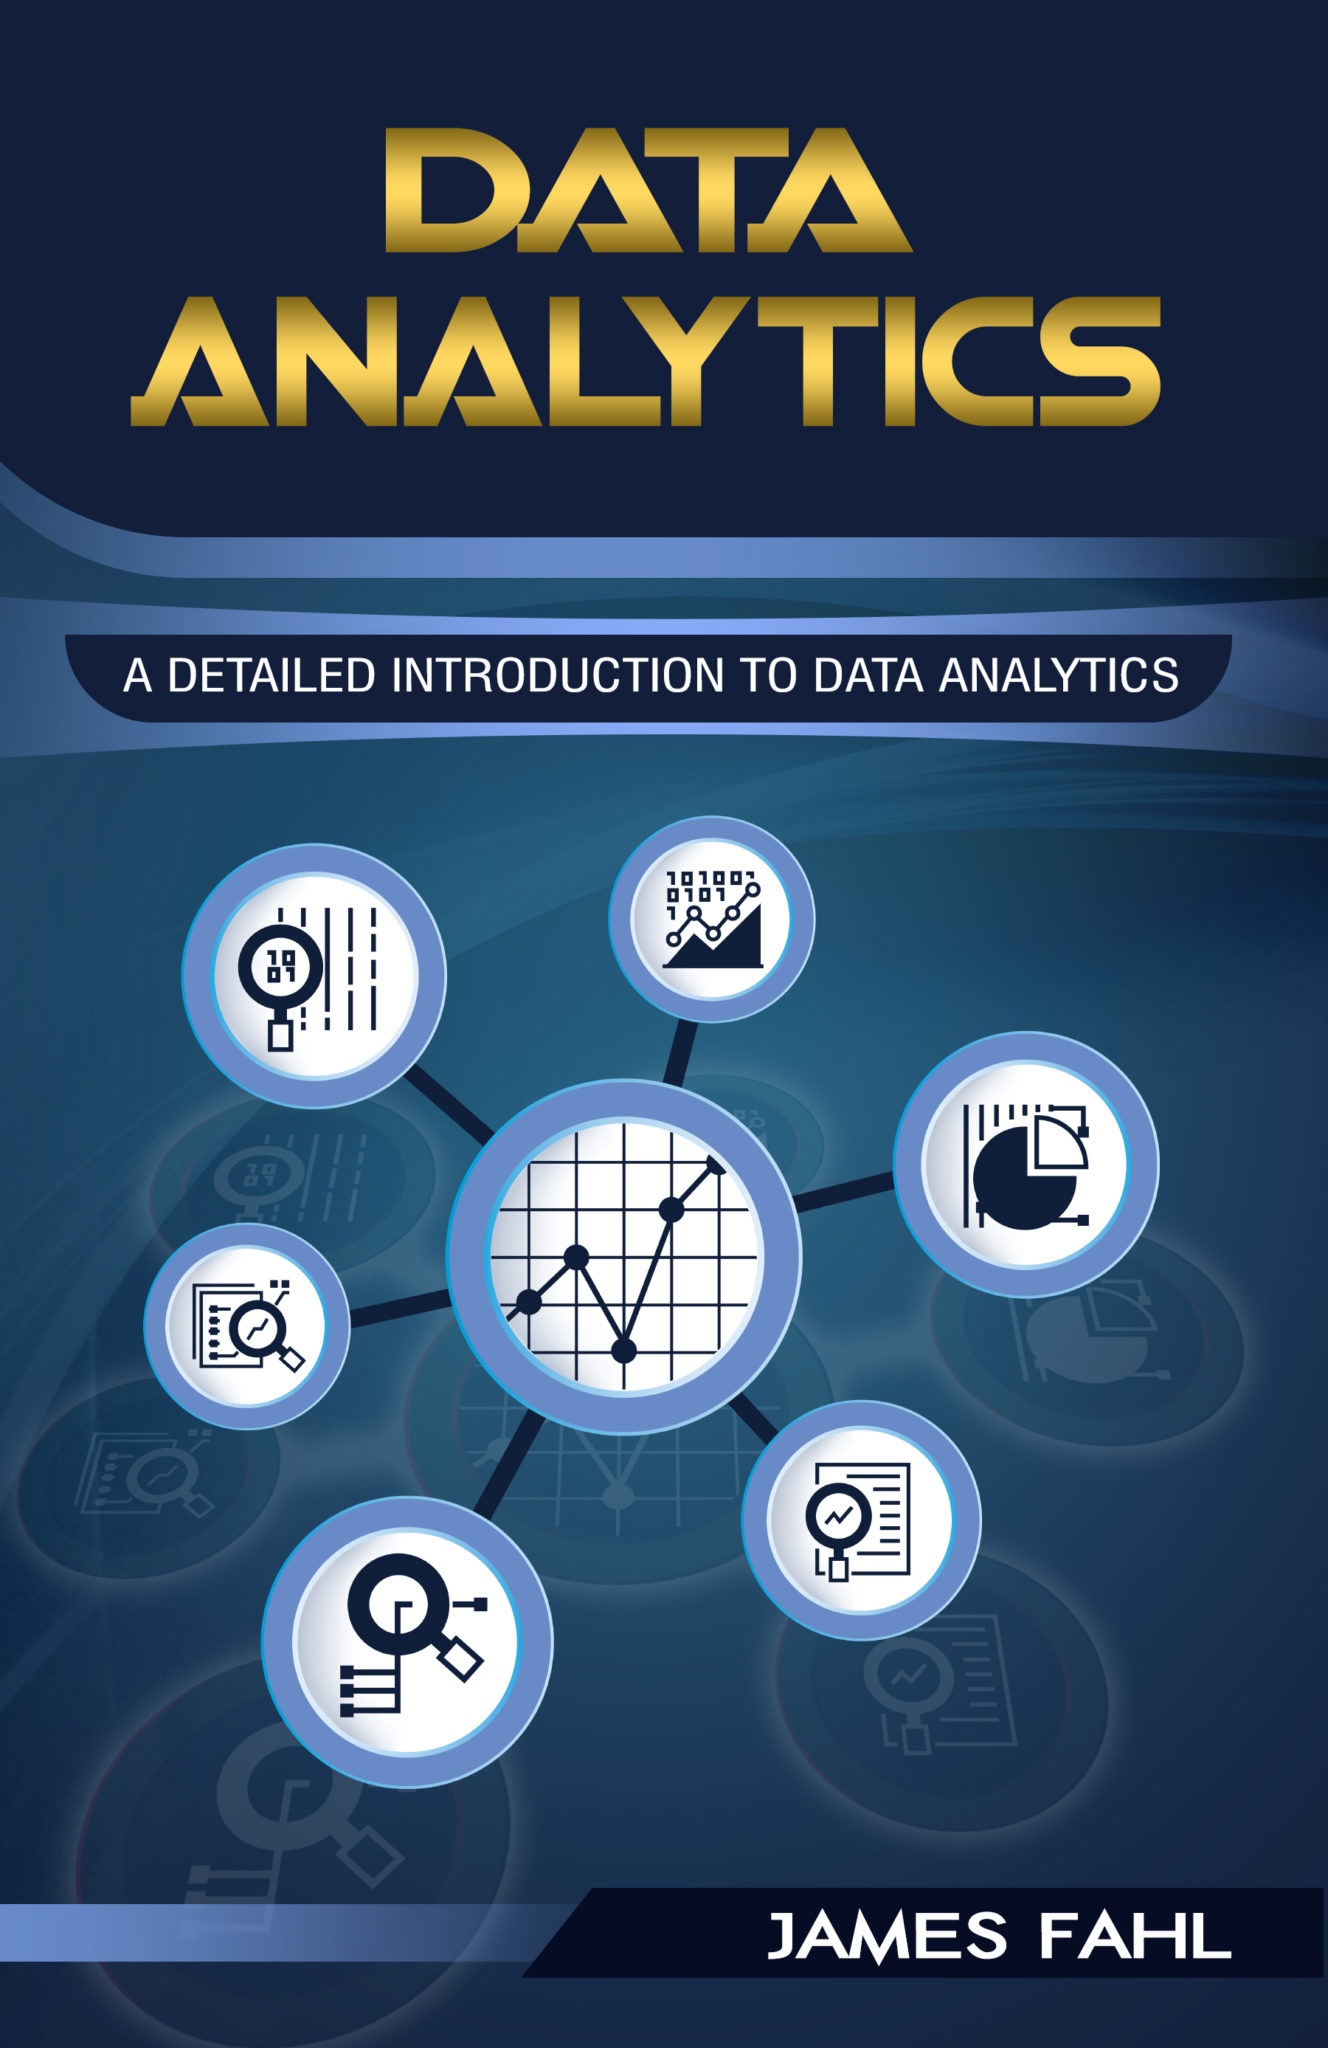 FREE: Data Analytics: A Practical Guide To Data Analytics For Business, Beginner To Expert(Data Analytics, Prescriptive Analytics, Statistics, Big Data, Intelligence, … Master Data, Data Science, Data Mining) Kindle Edition by James Fahl